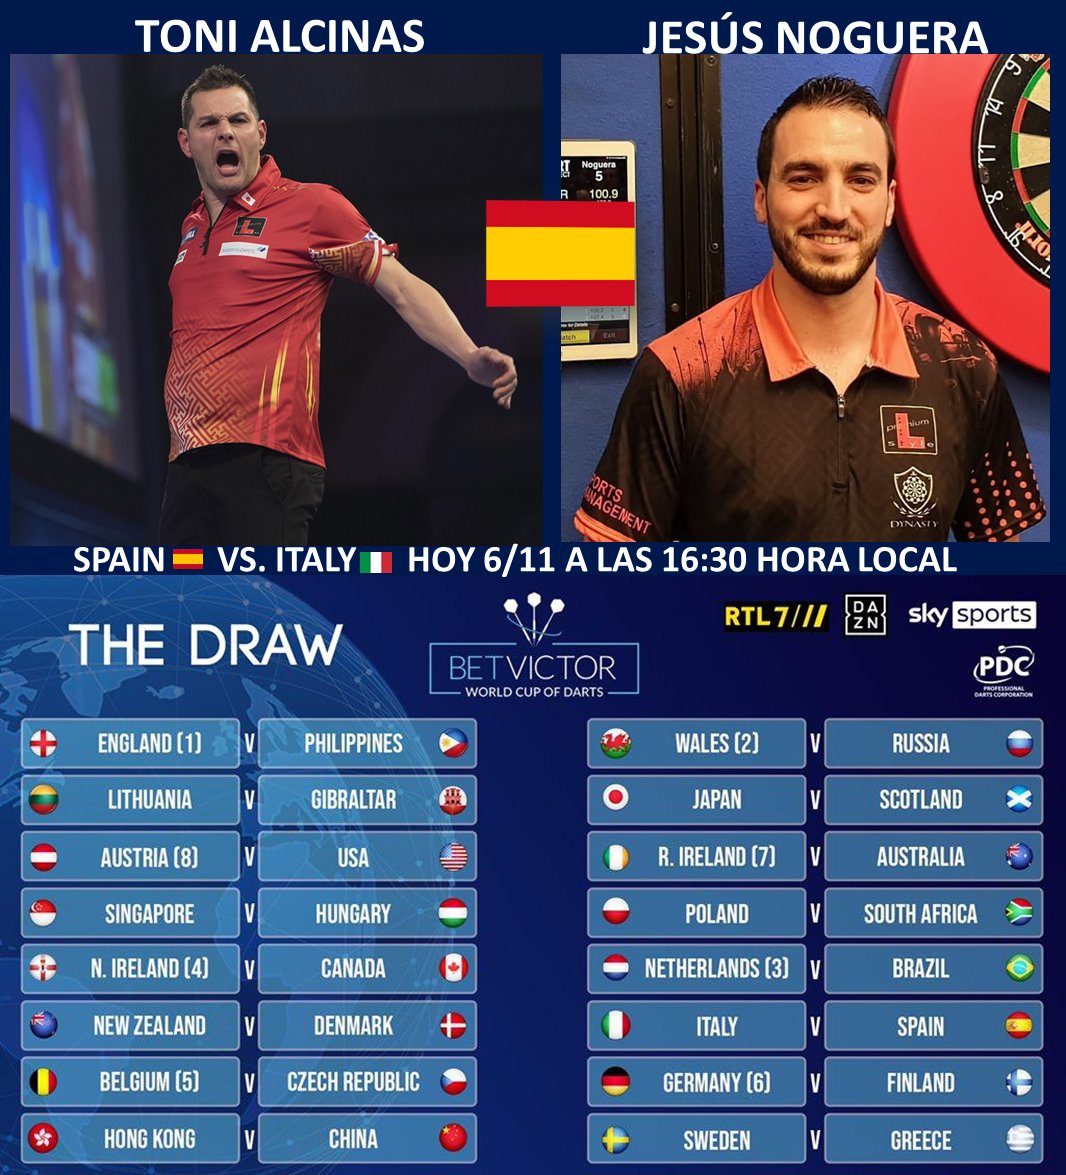 Today at 4:30 p.m. (local time) Final Stage in the @PDCEurope World Cup of Darts from Austria. The Spanish team formed by our @radikalplayers Platinum Official Player and brand ambassador @AntonioAlcinas together with @yuso180 faces the Italian team. Good luck Team!!